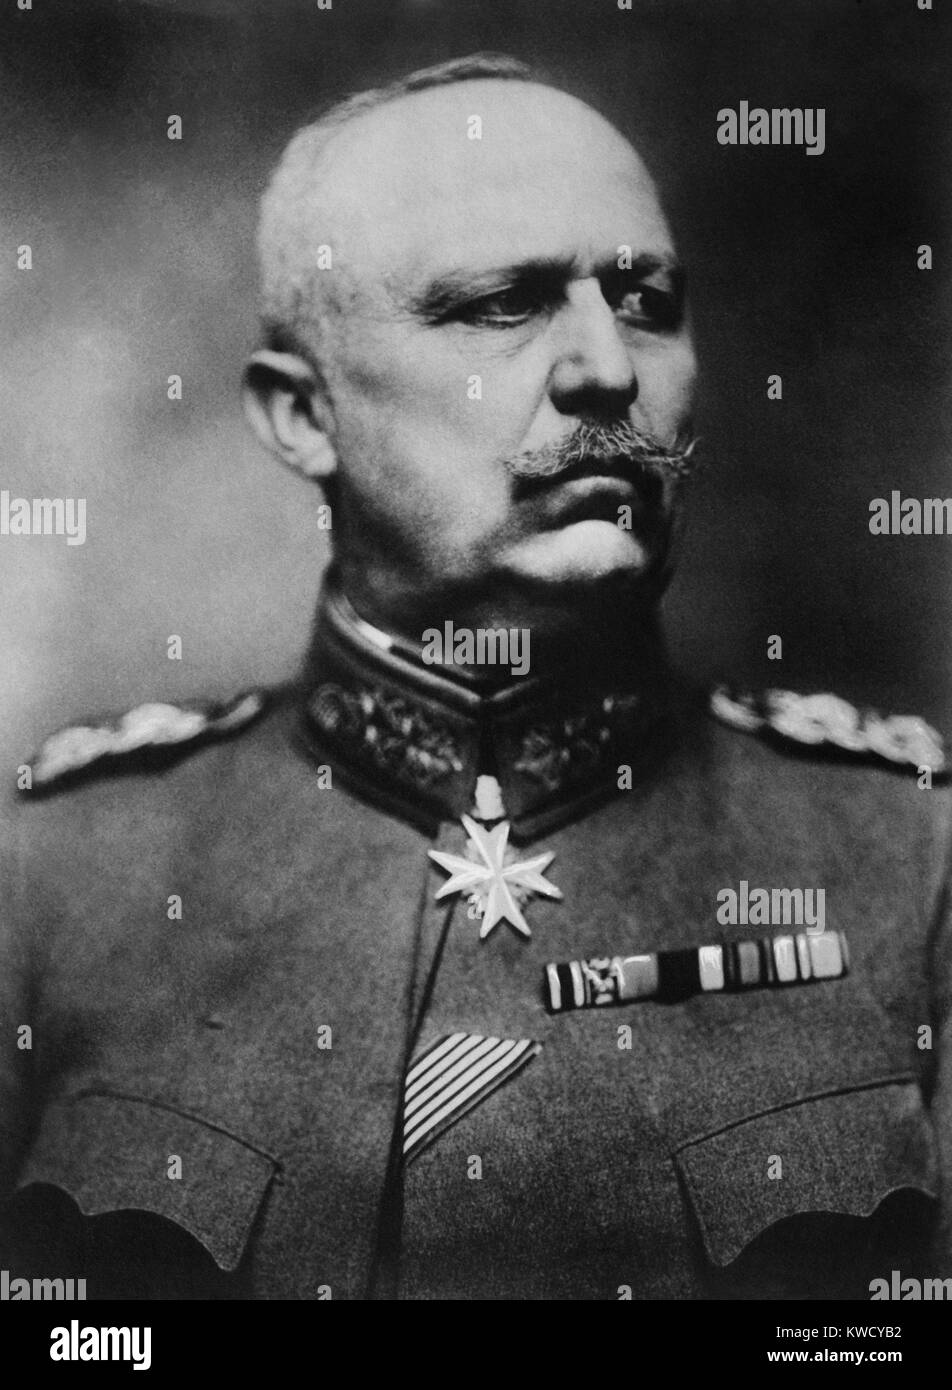 General Erich Ludendorff, military and defacto political leader of Germany during World War 1. After the war he blamed Germanys defeat on betrayal by Marxists and Bolsheviks. He tried to persuade the Weimer Republic Army to support Hitlers Beer Hall Put (BSLOC 2017 1 9) Stock Photo